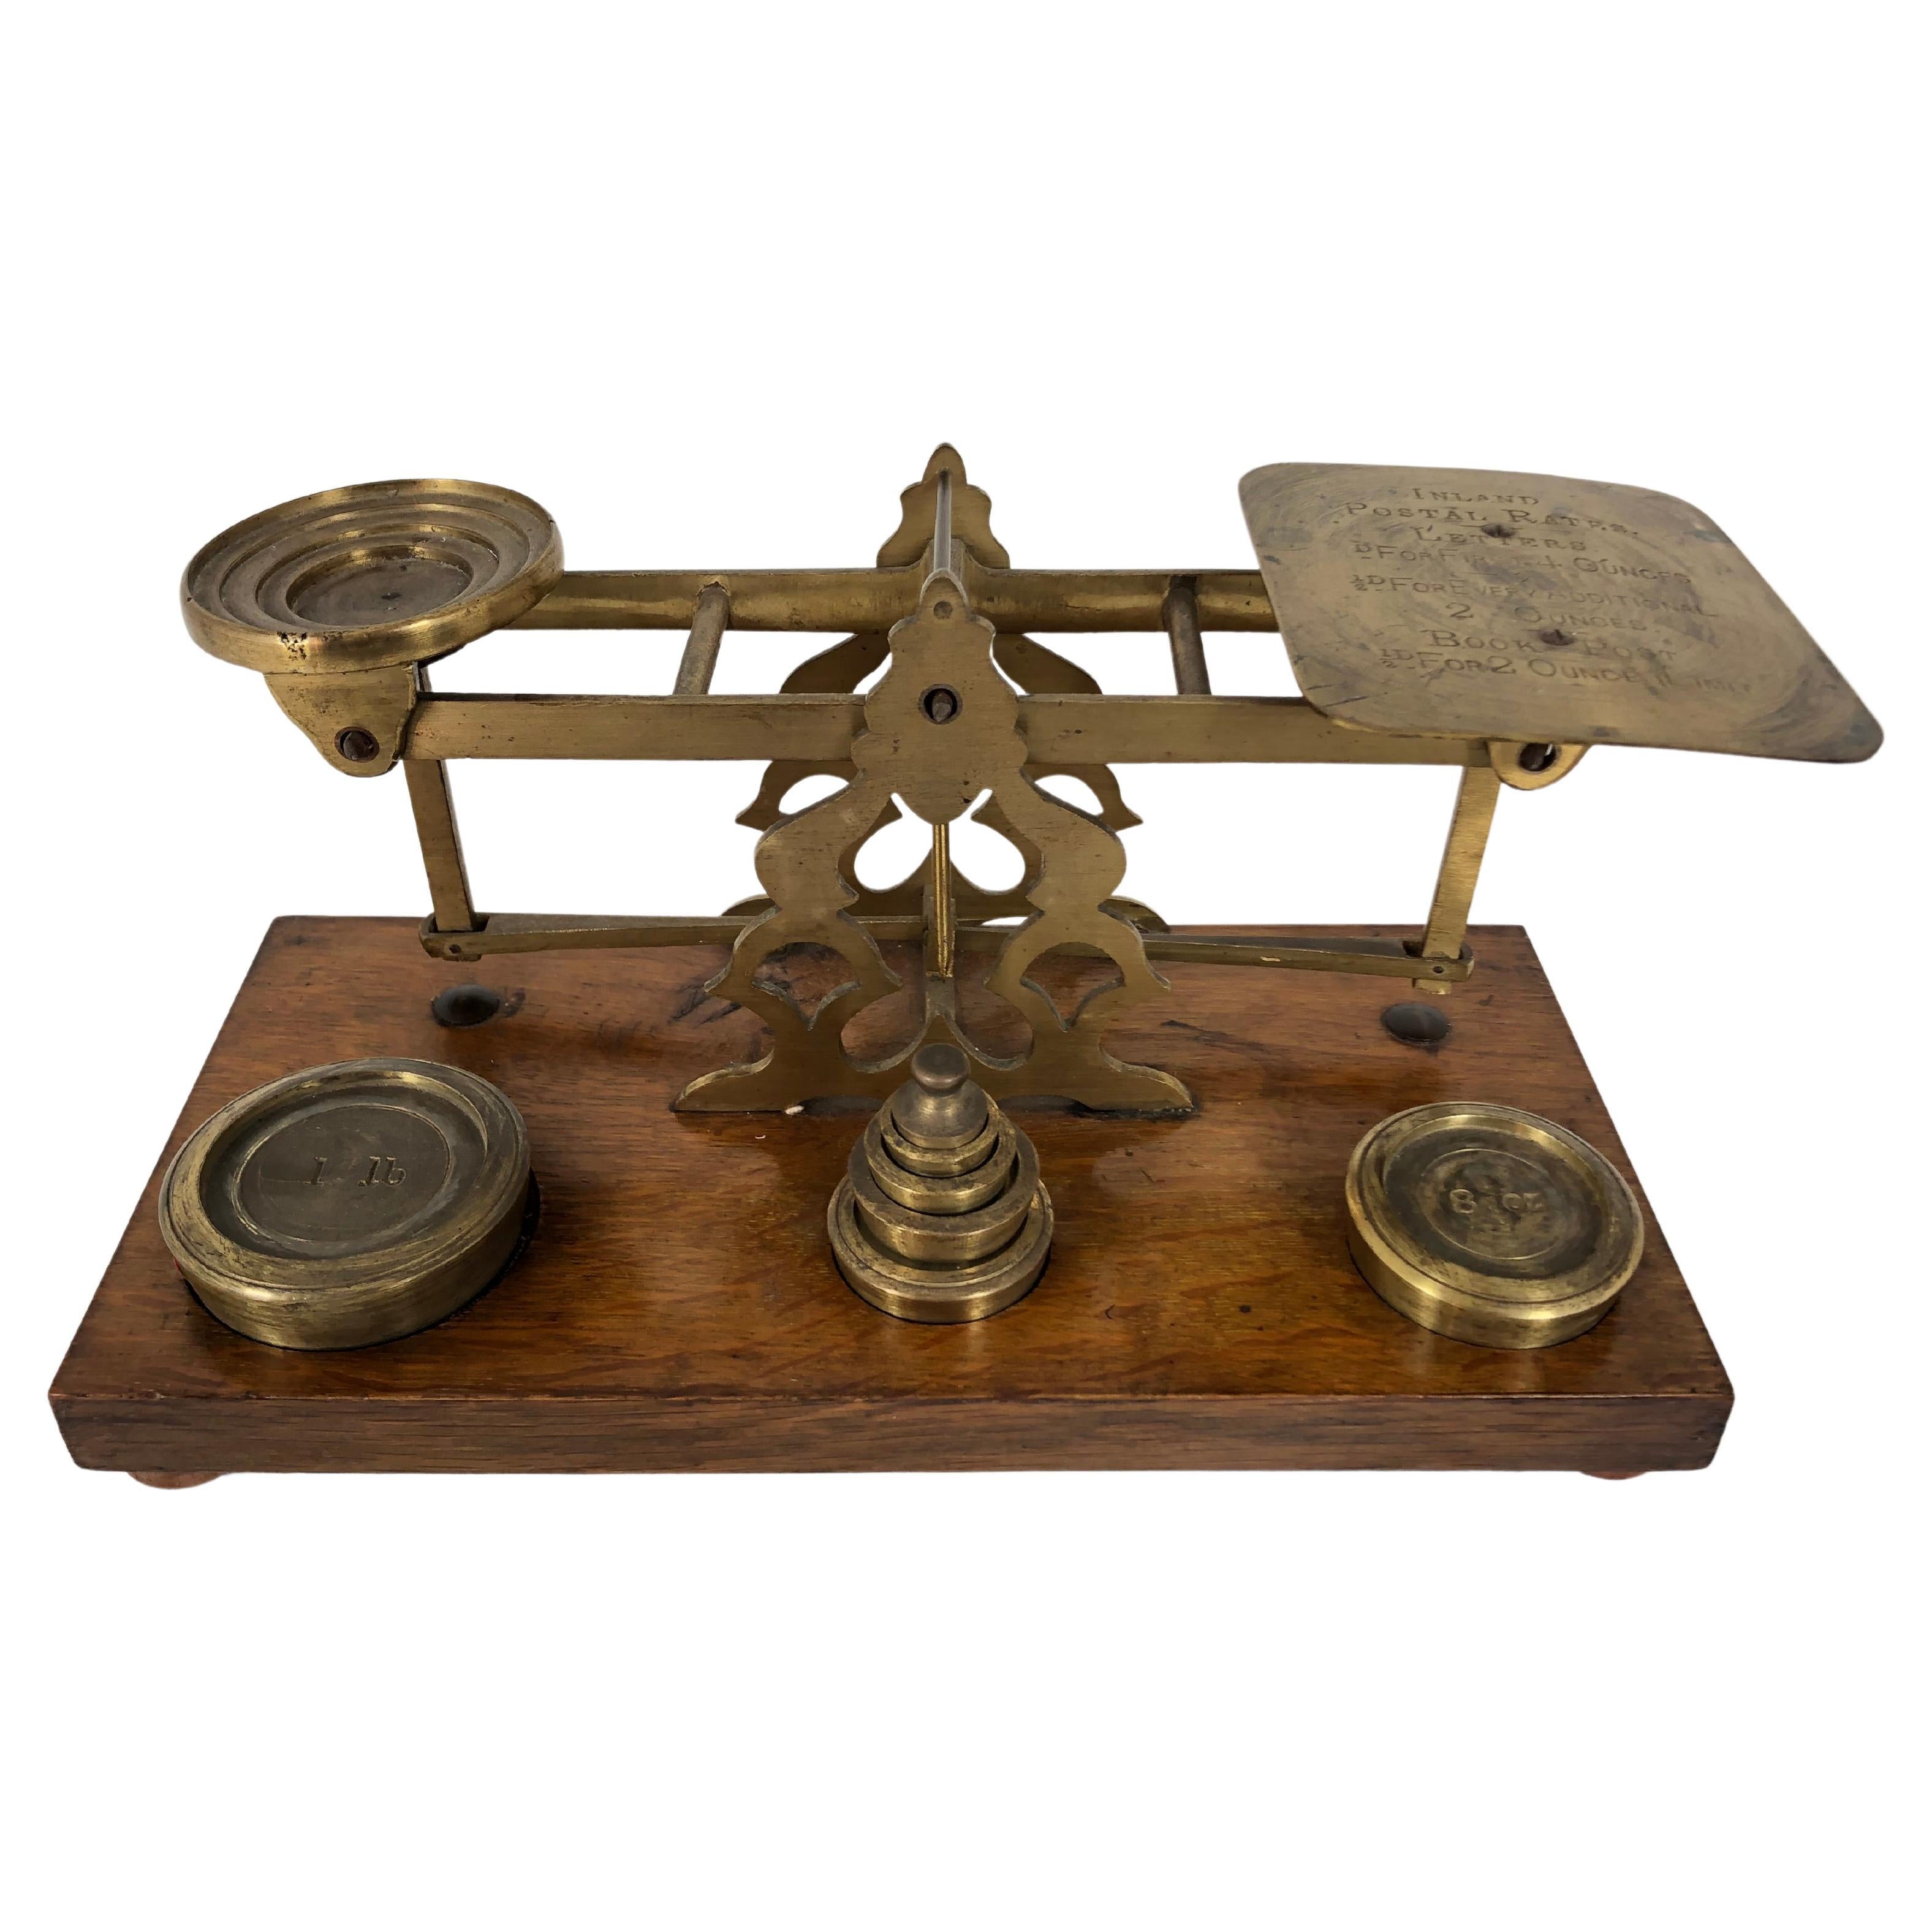 https://a.1stdibscdn.com/antique-victorian-postal-scales-weights-on-oak-stand-scotland-1880-h709-for-sale/f_9113/f_301237421661364060055/f_30123742_1661364061426_bg_processed.jpg